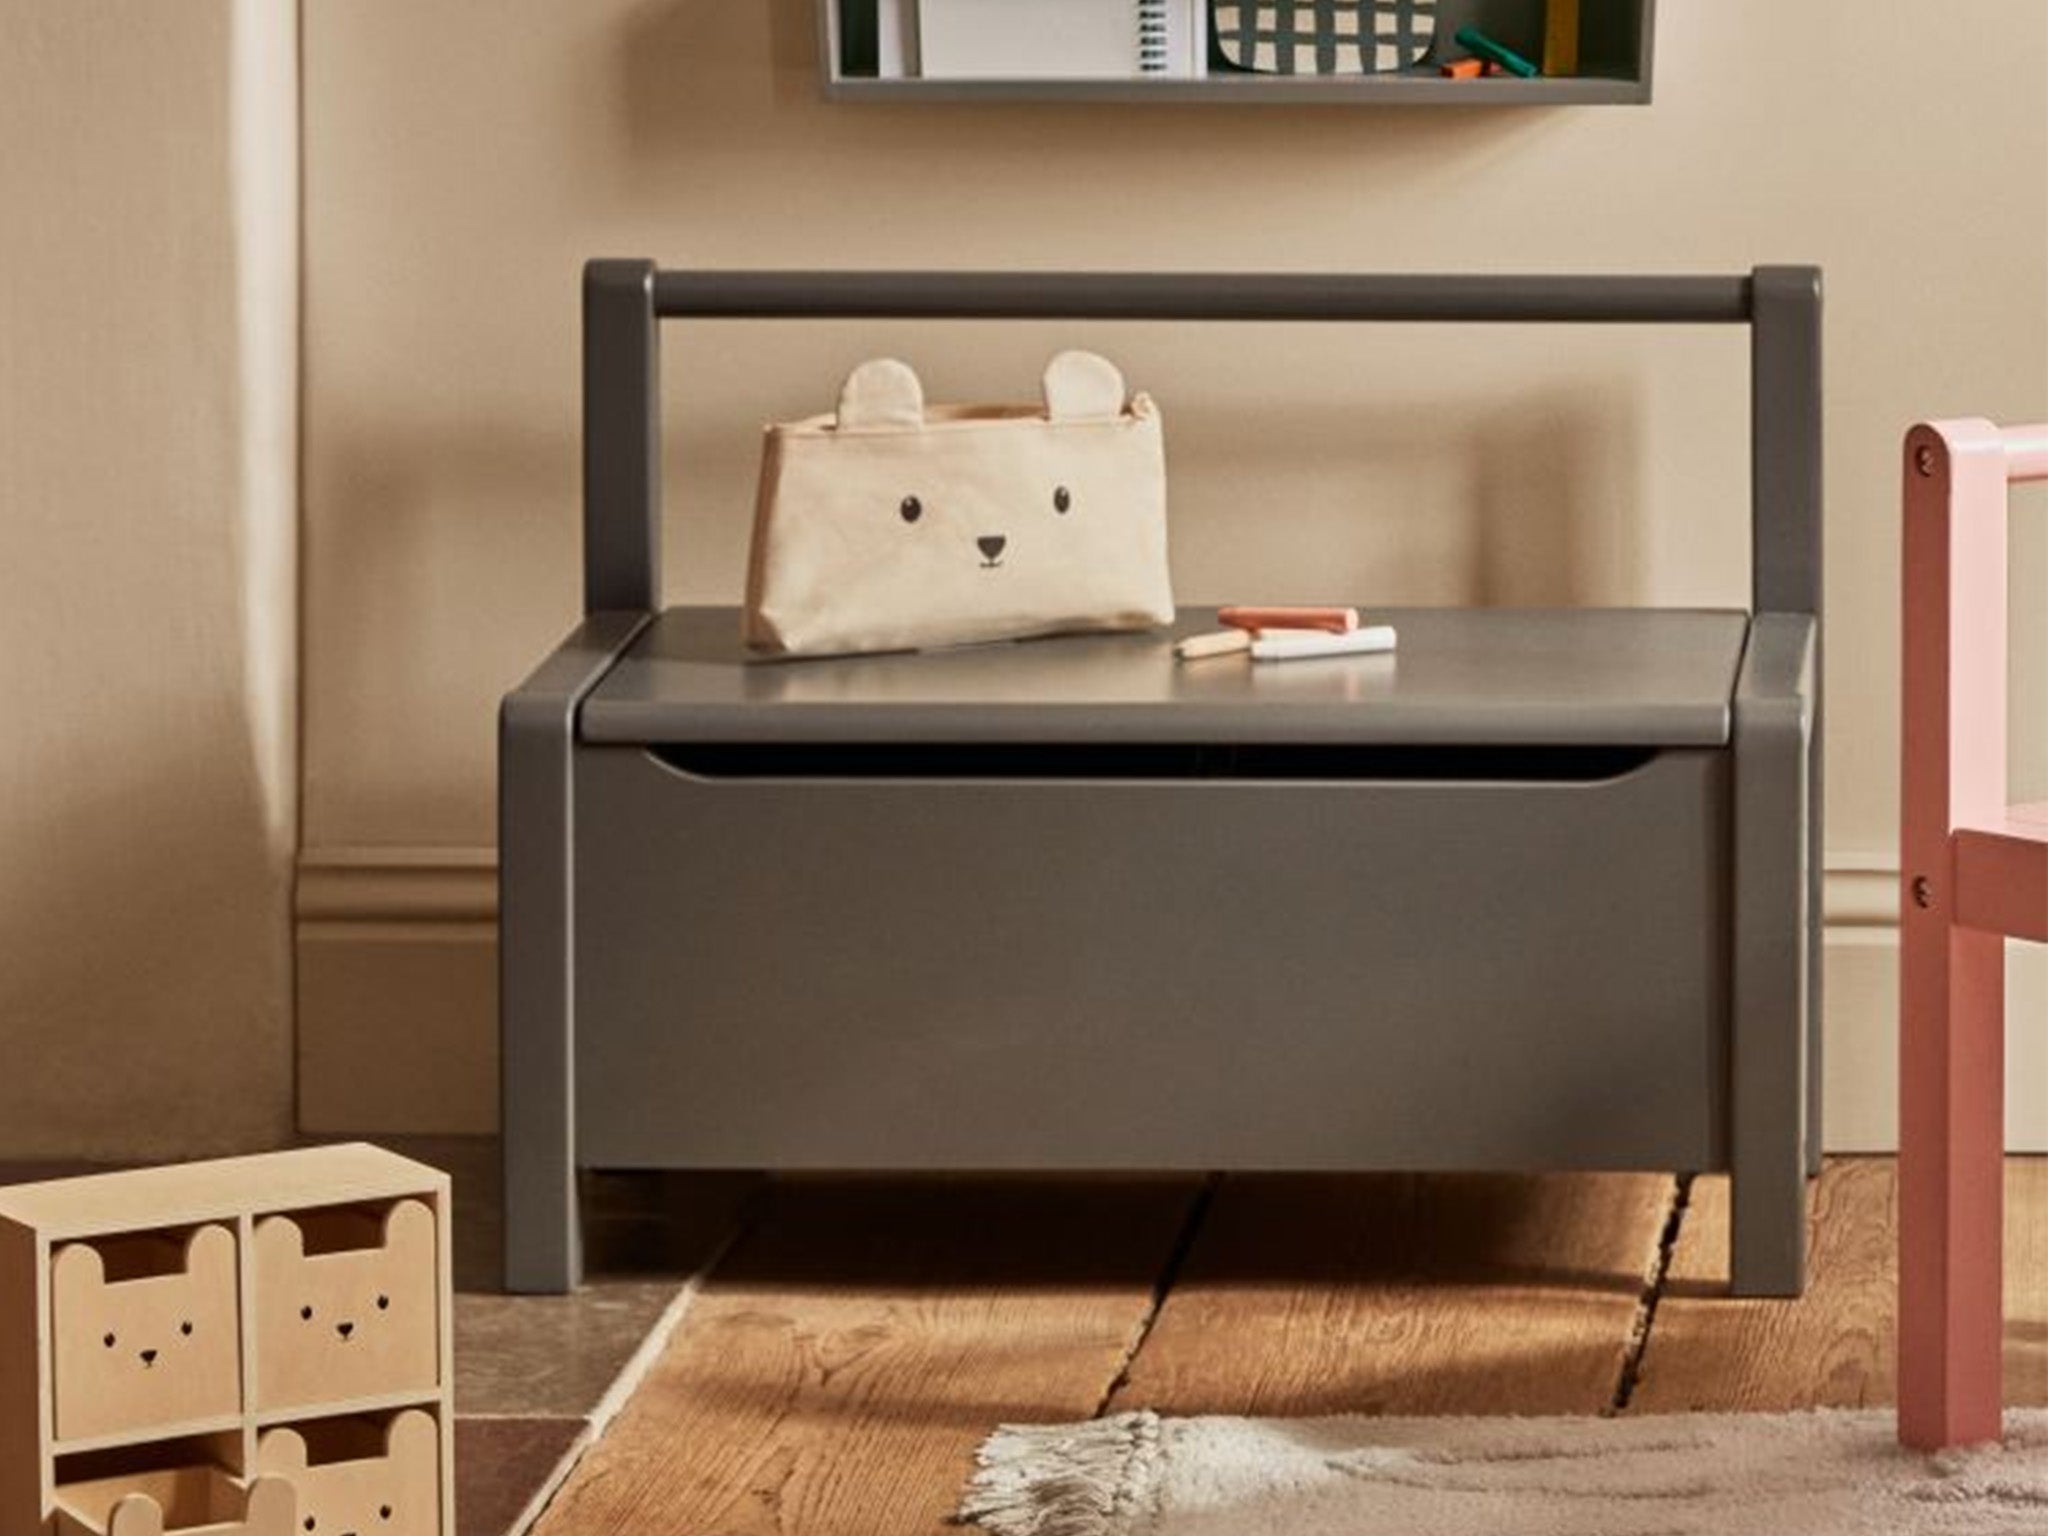 https://static.independent.co.uk/2022/09/02/12/HM%20home%20childrens%20storage%20bench.jpg